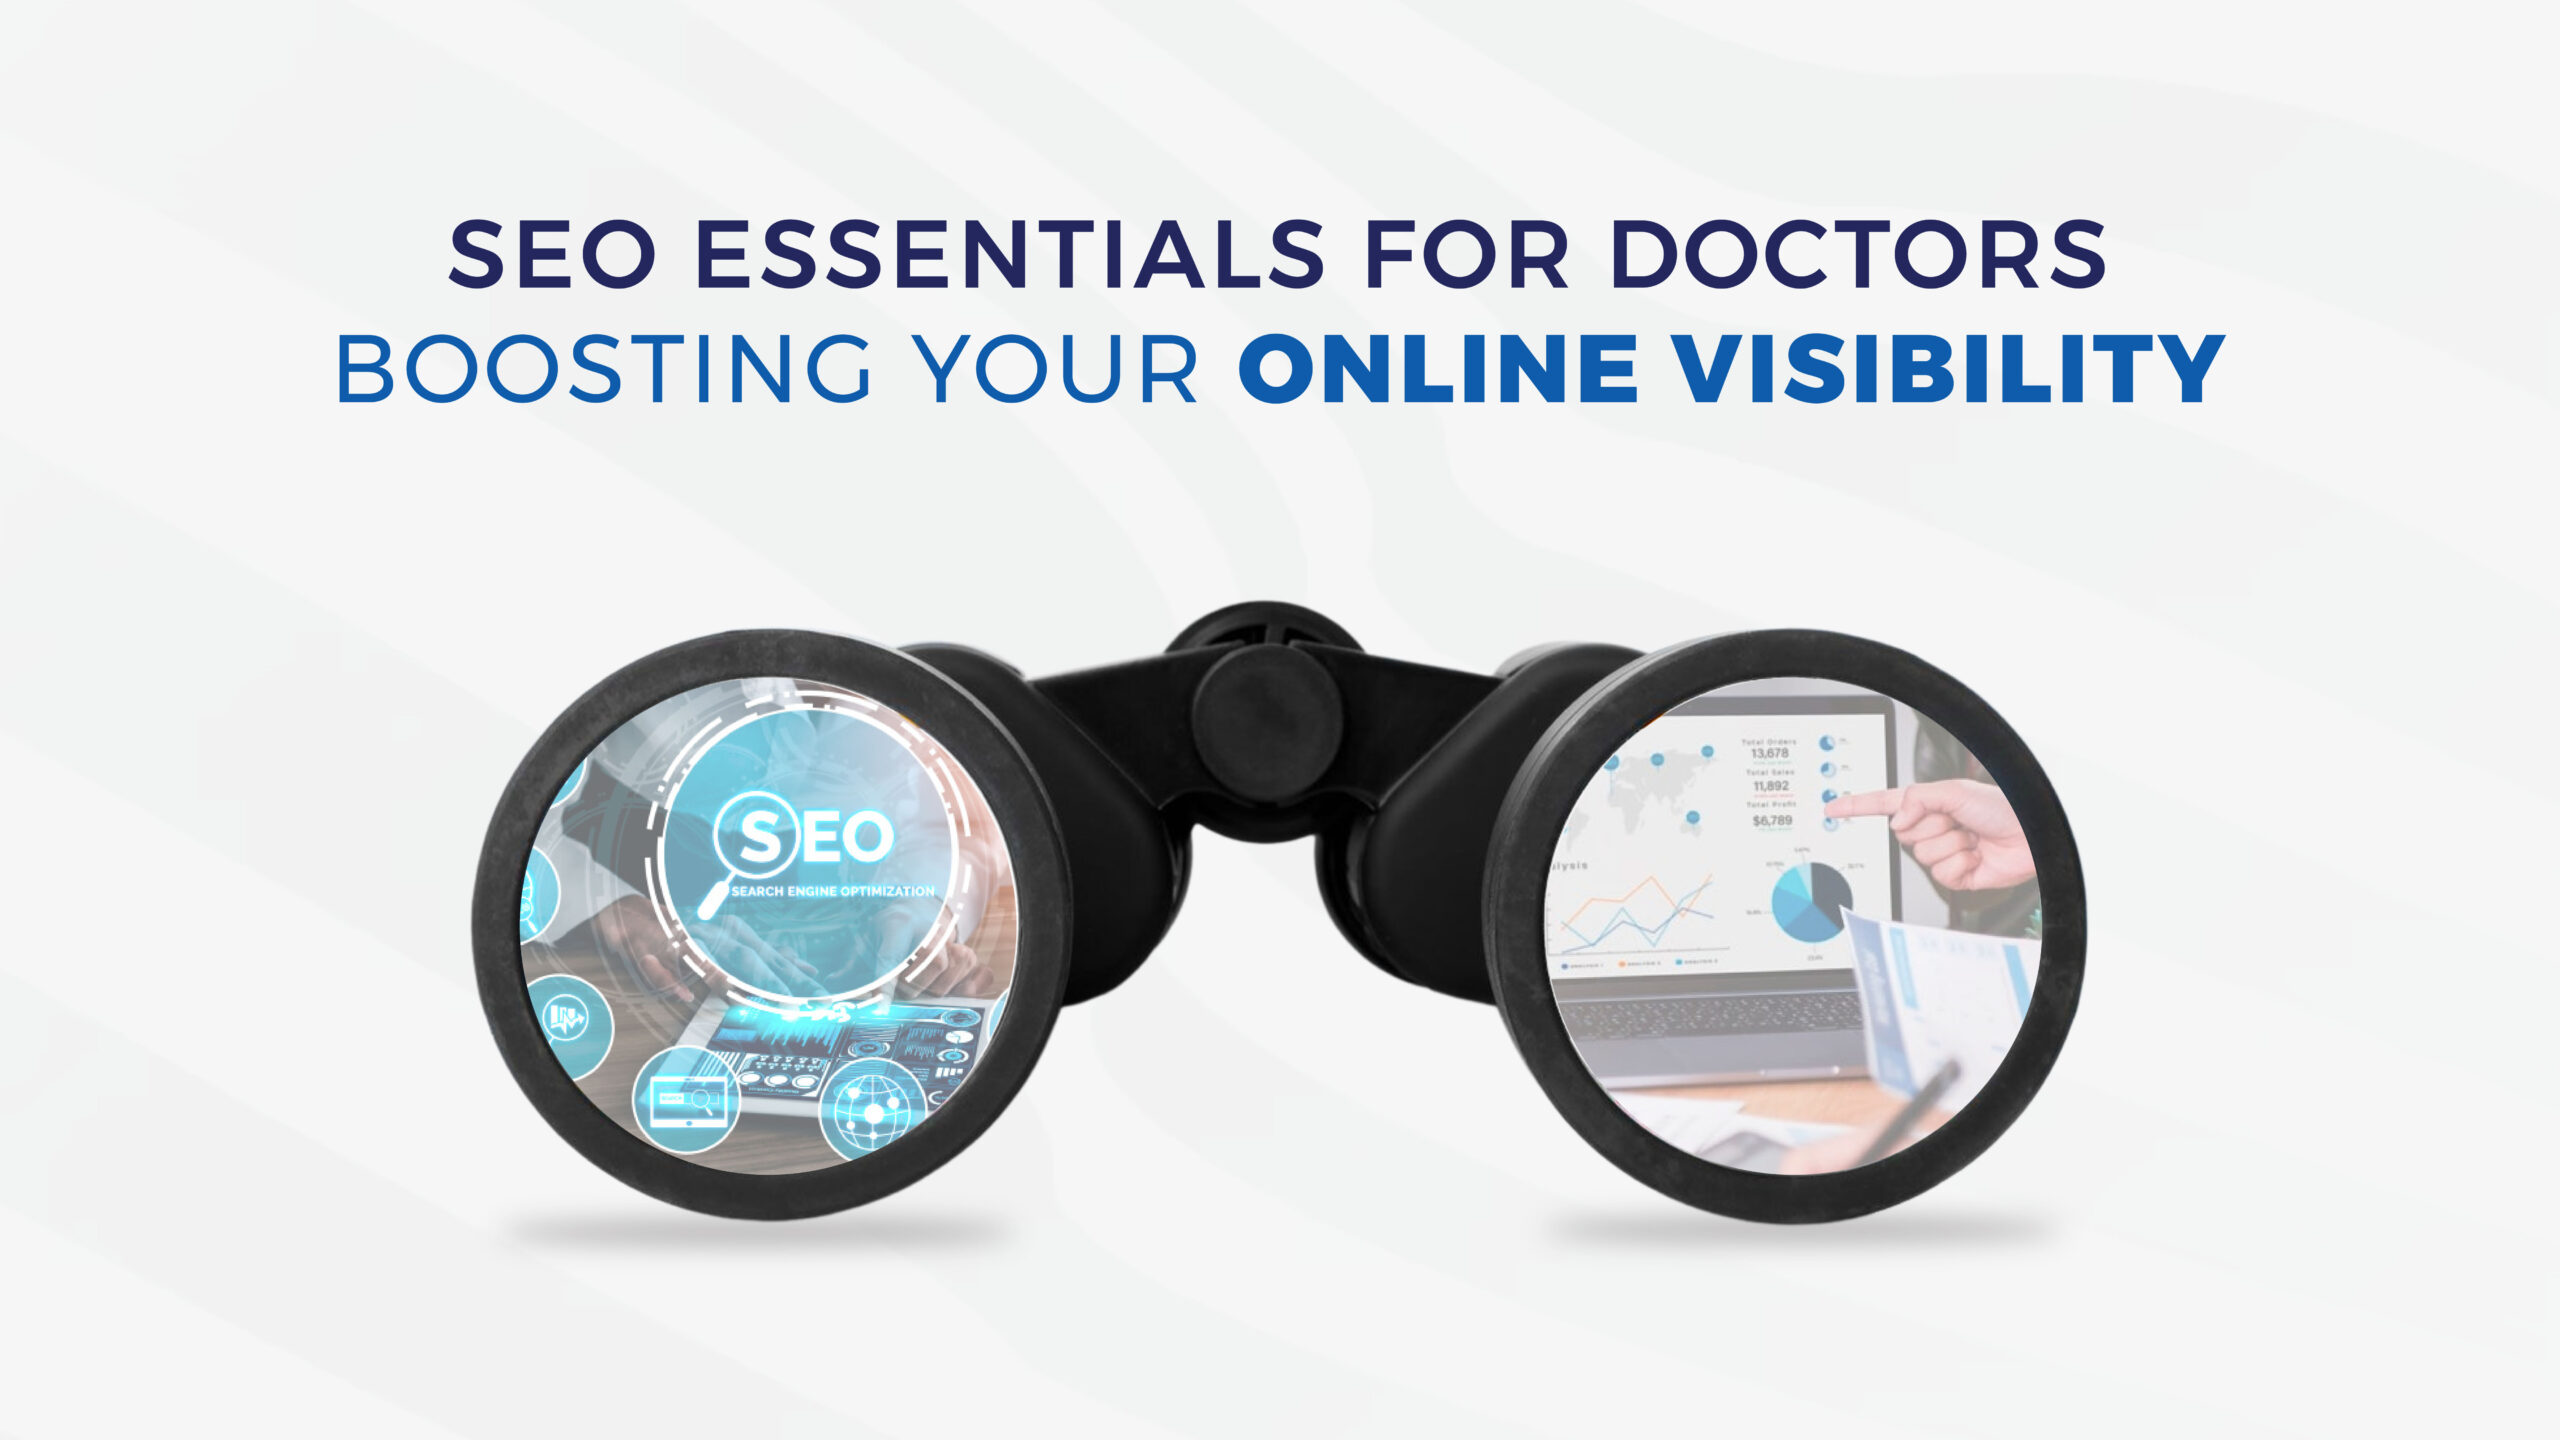 SEO Essentials for Doctors: Boosting Your Online Visibility